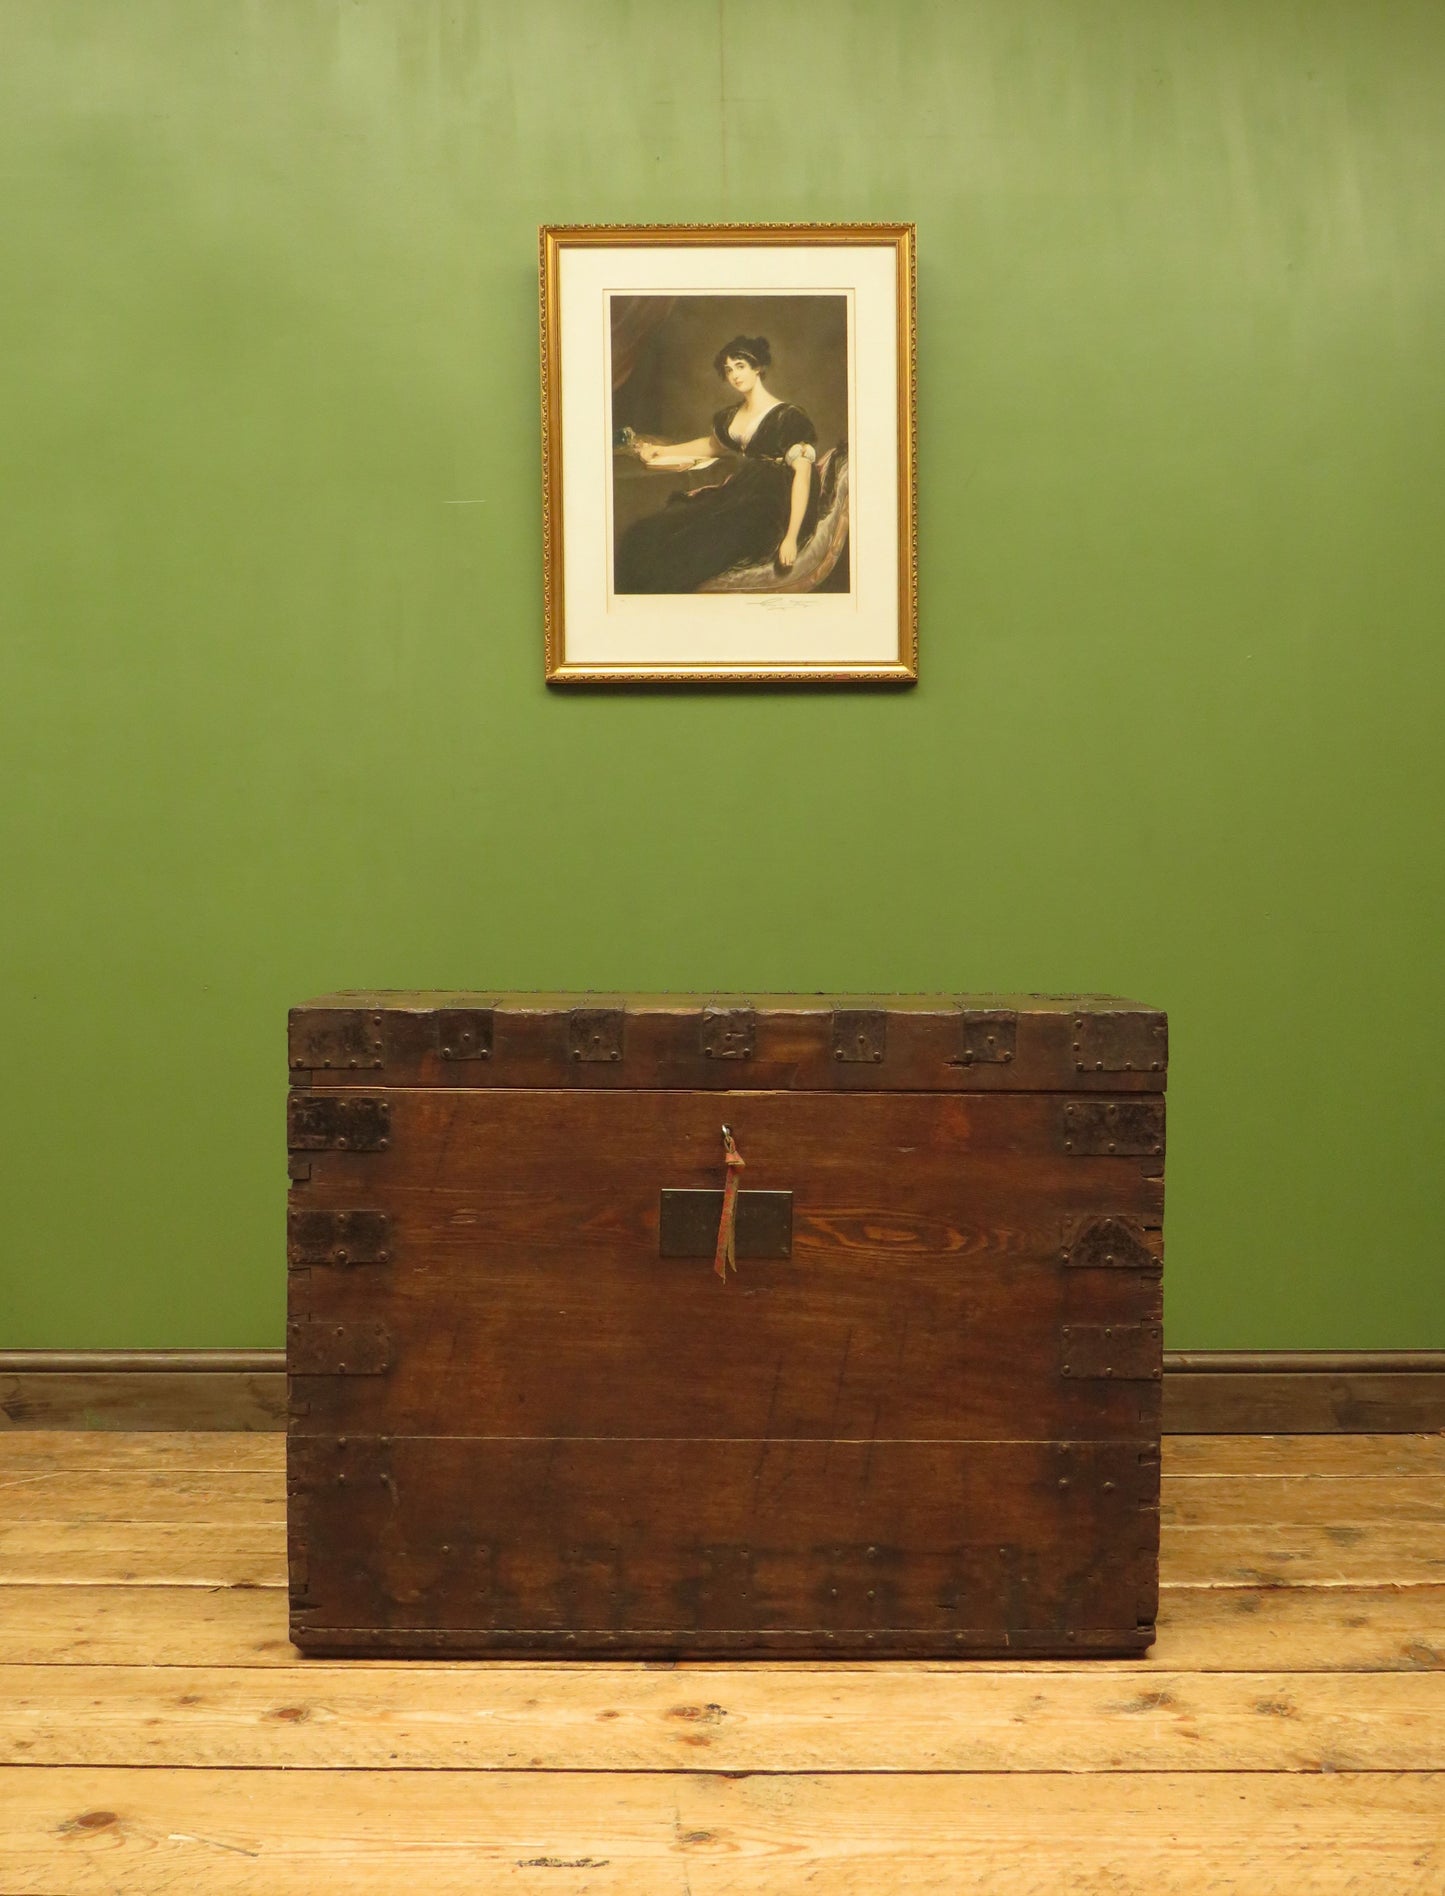 English Antique Oak Silver Chest, property of Lady Maxwell of Calderwood